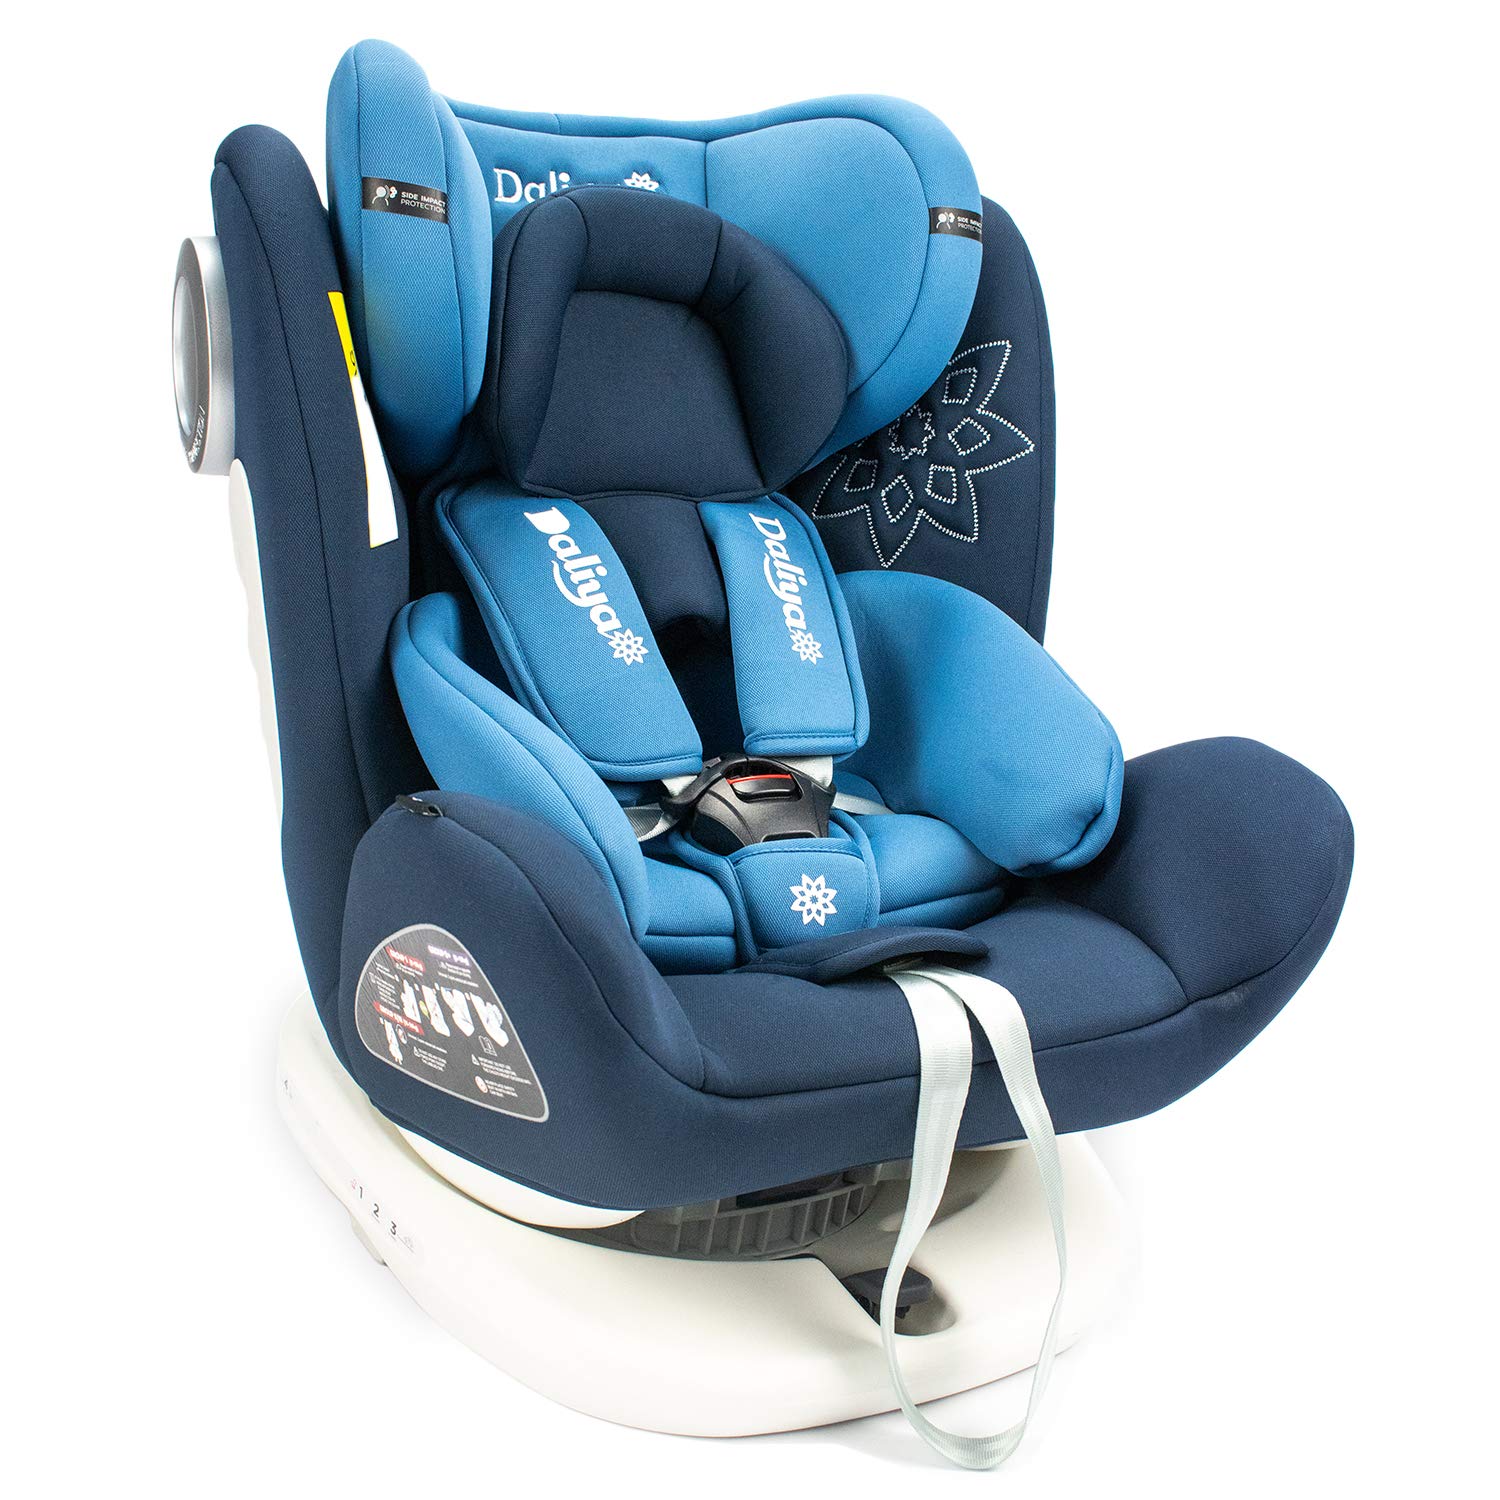 Daliya® Sedion Child Car Seat 0-36 kg 360° Grey Child Seat Size 0+1+2+3 Isofix Fix Top Tether 5-Point Safety Belt Includes Sun Canopy 2x Isofix Colour Blue